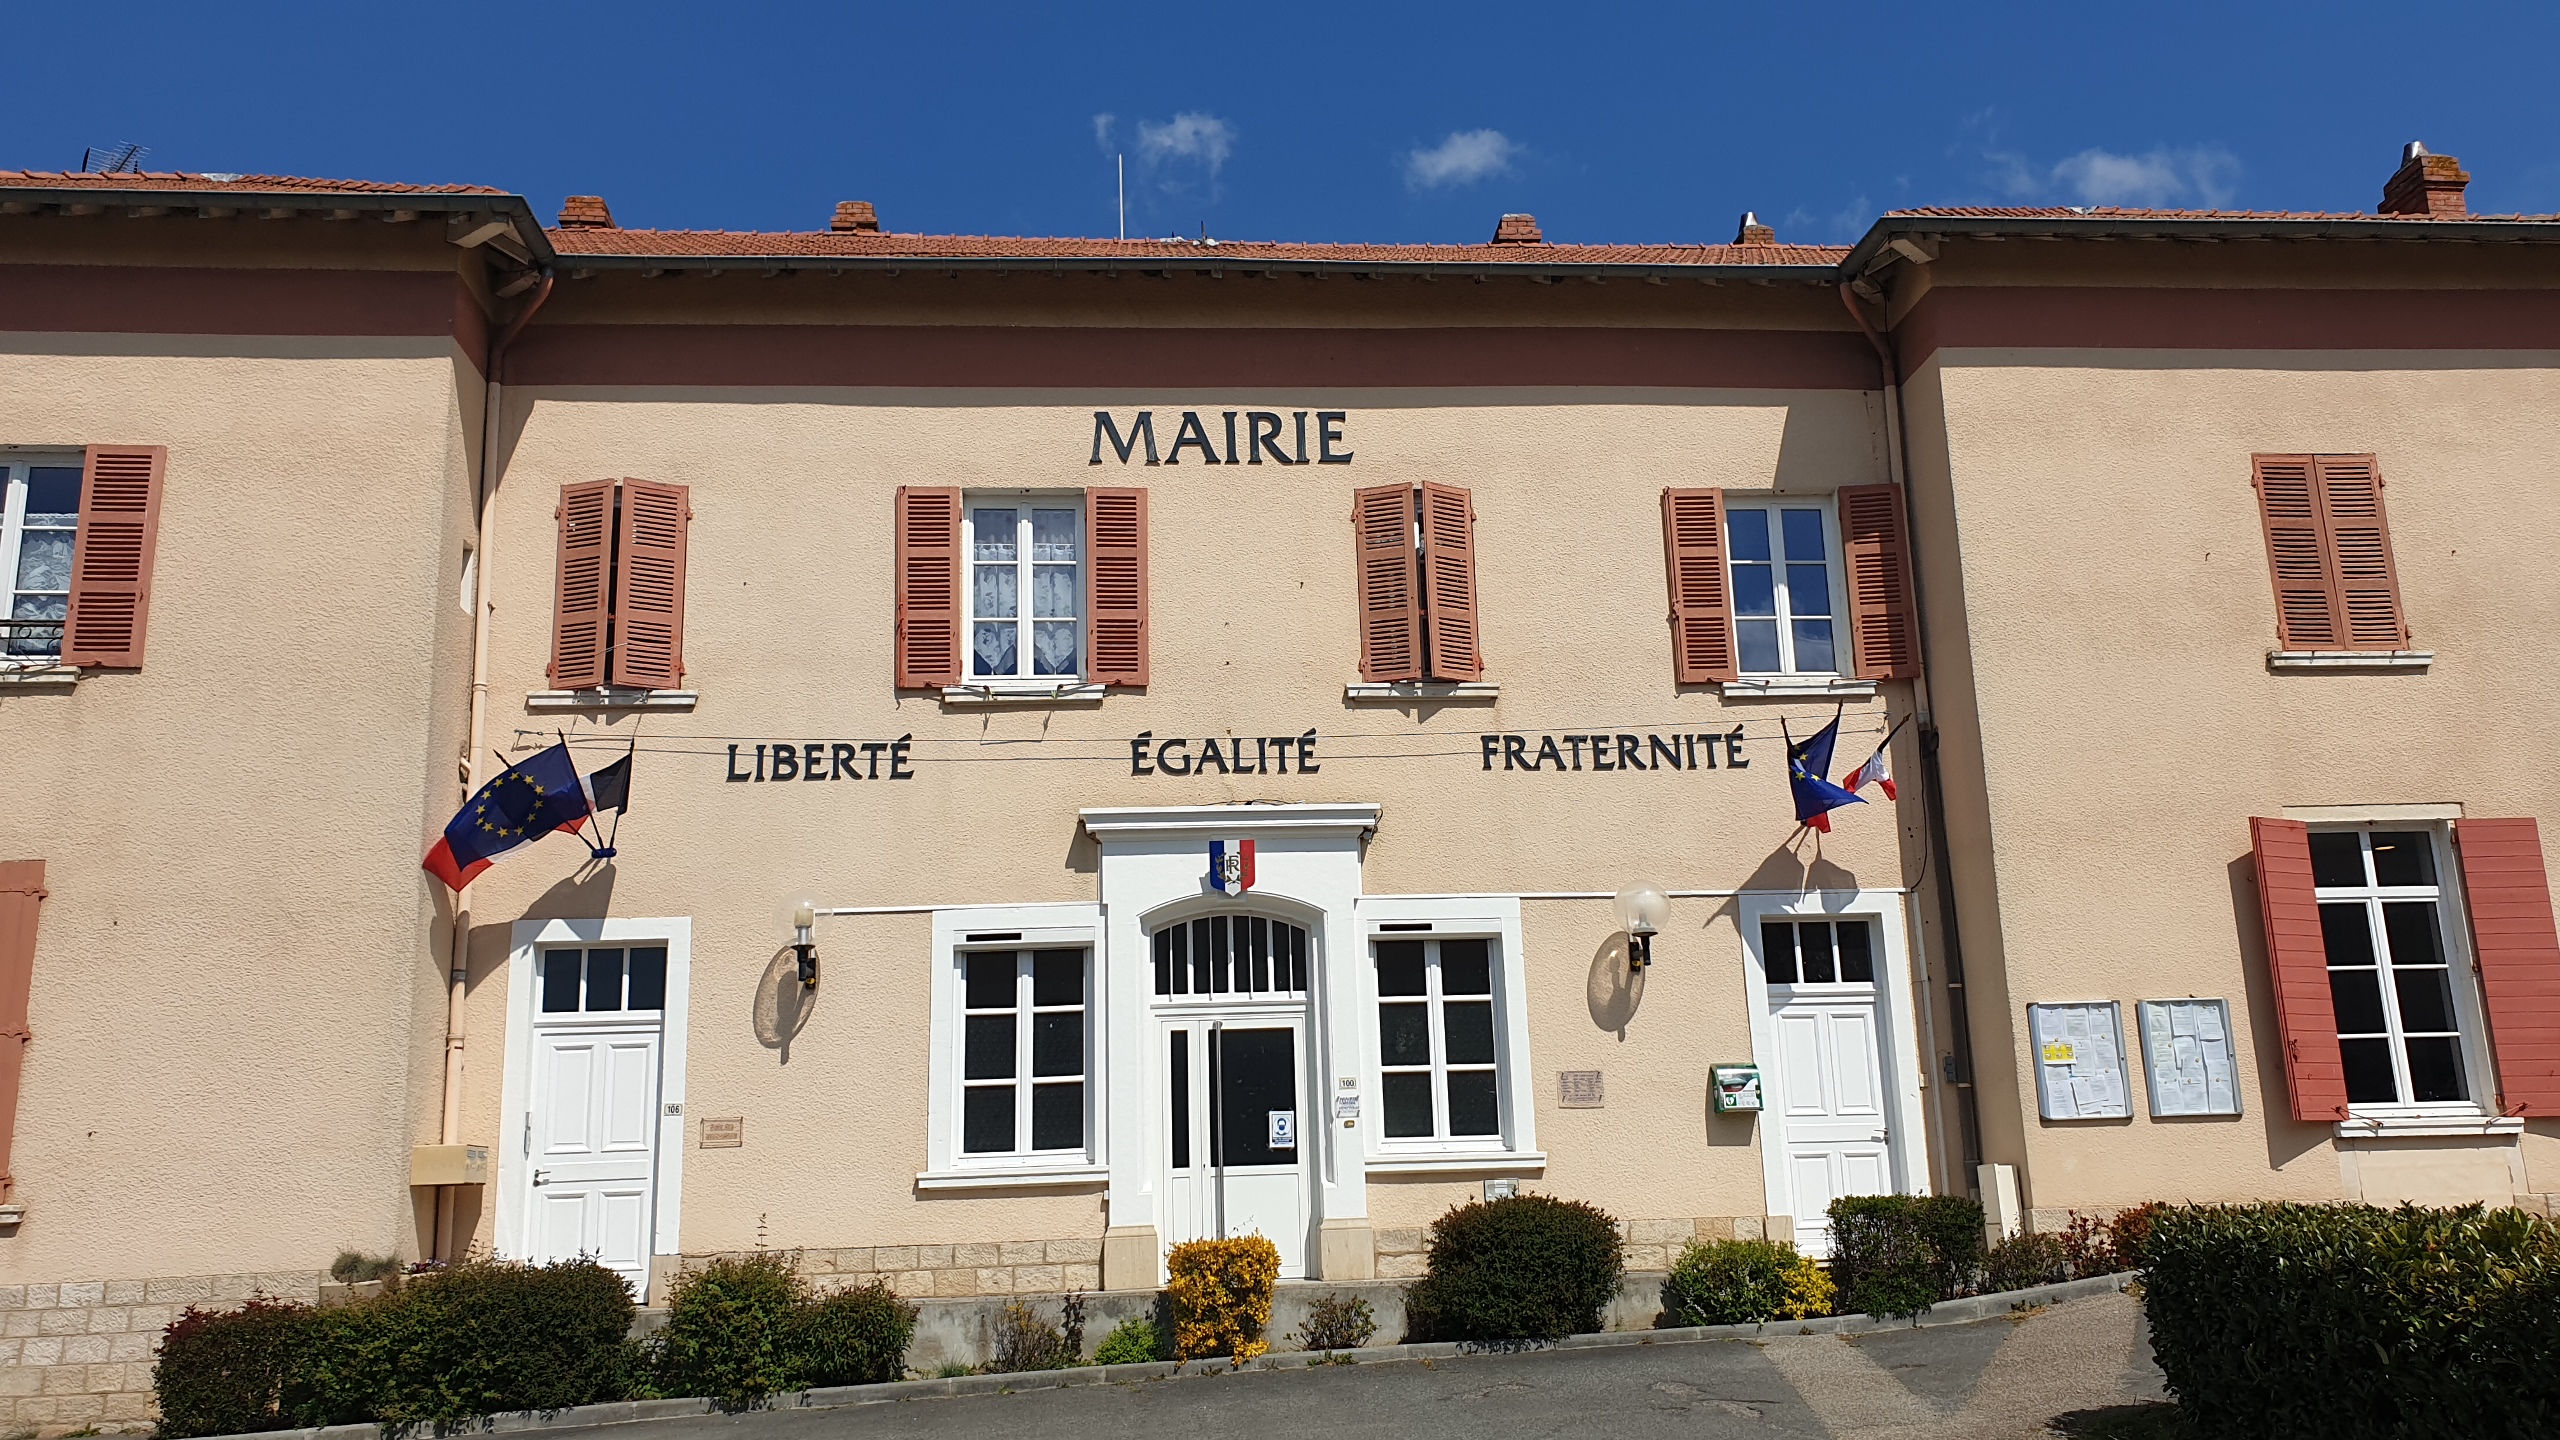 Mairie volets ouverts 2021